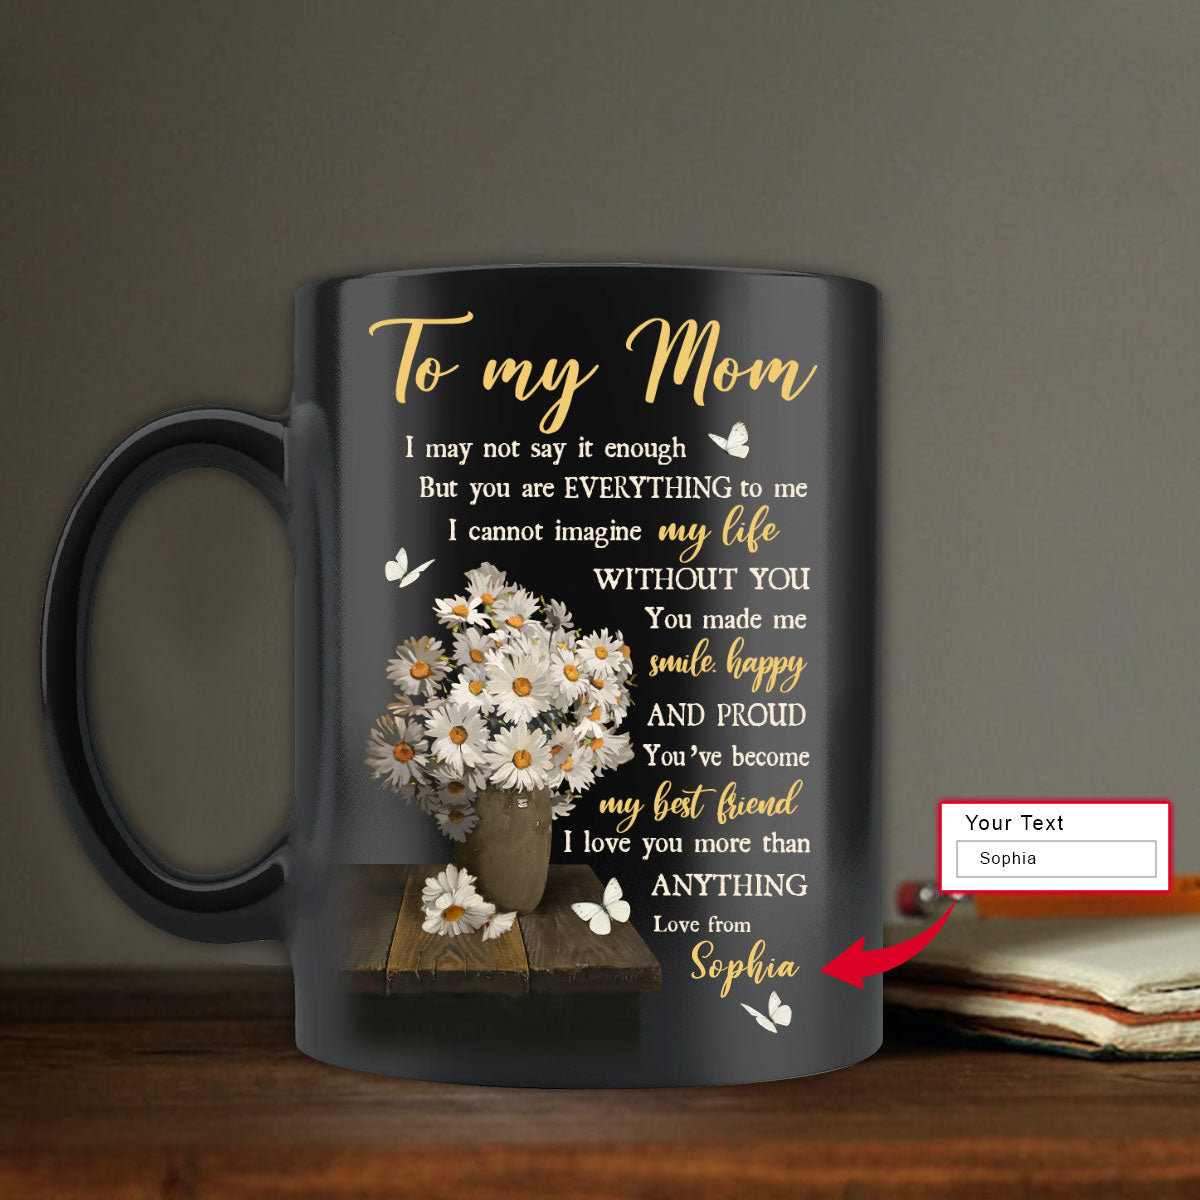 Gift For Mom Personalized Mug - Daughter to mom, Daisy vase, White butterfly Mug - Custom Gift For Mother's Day, Presents for Mom